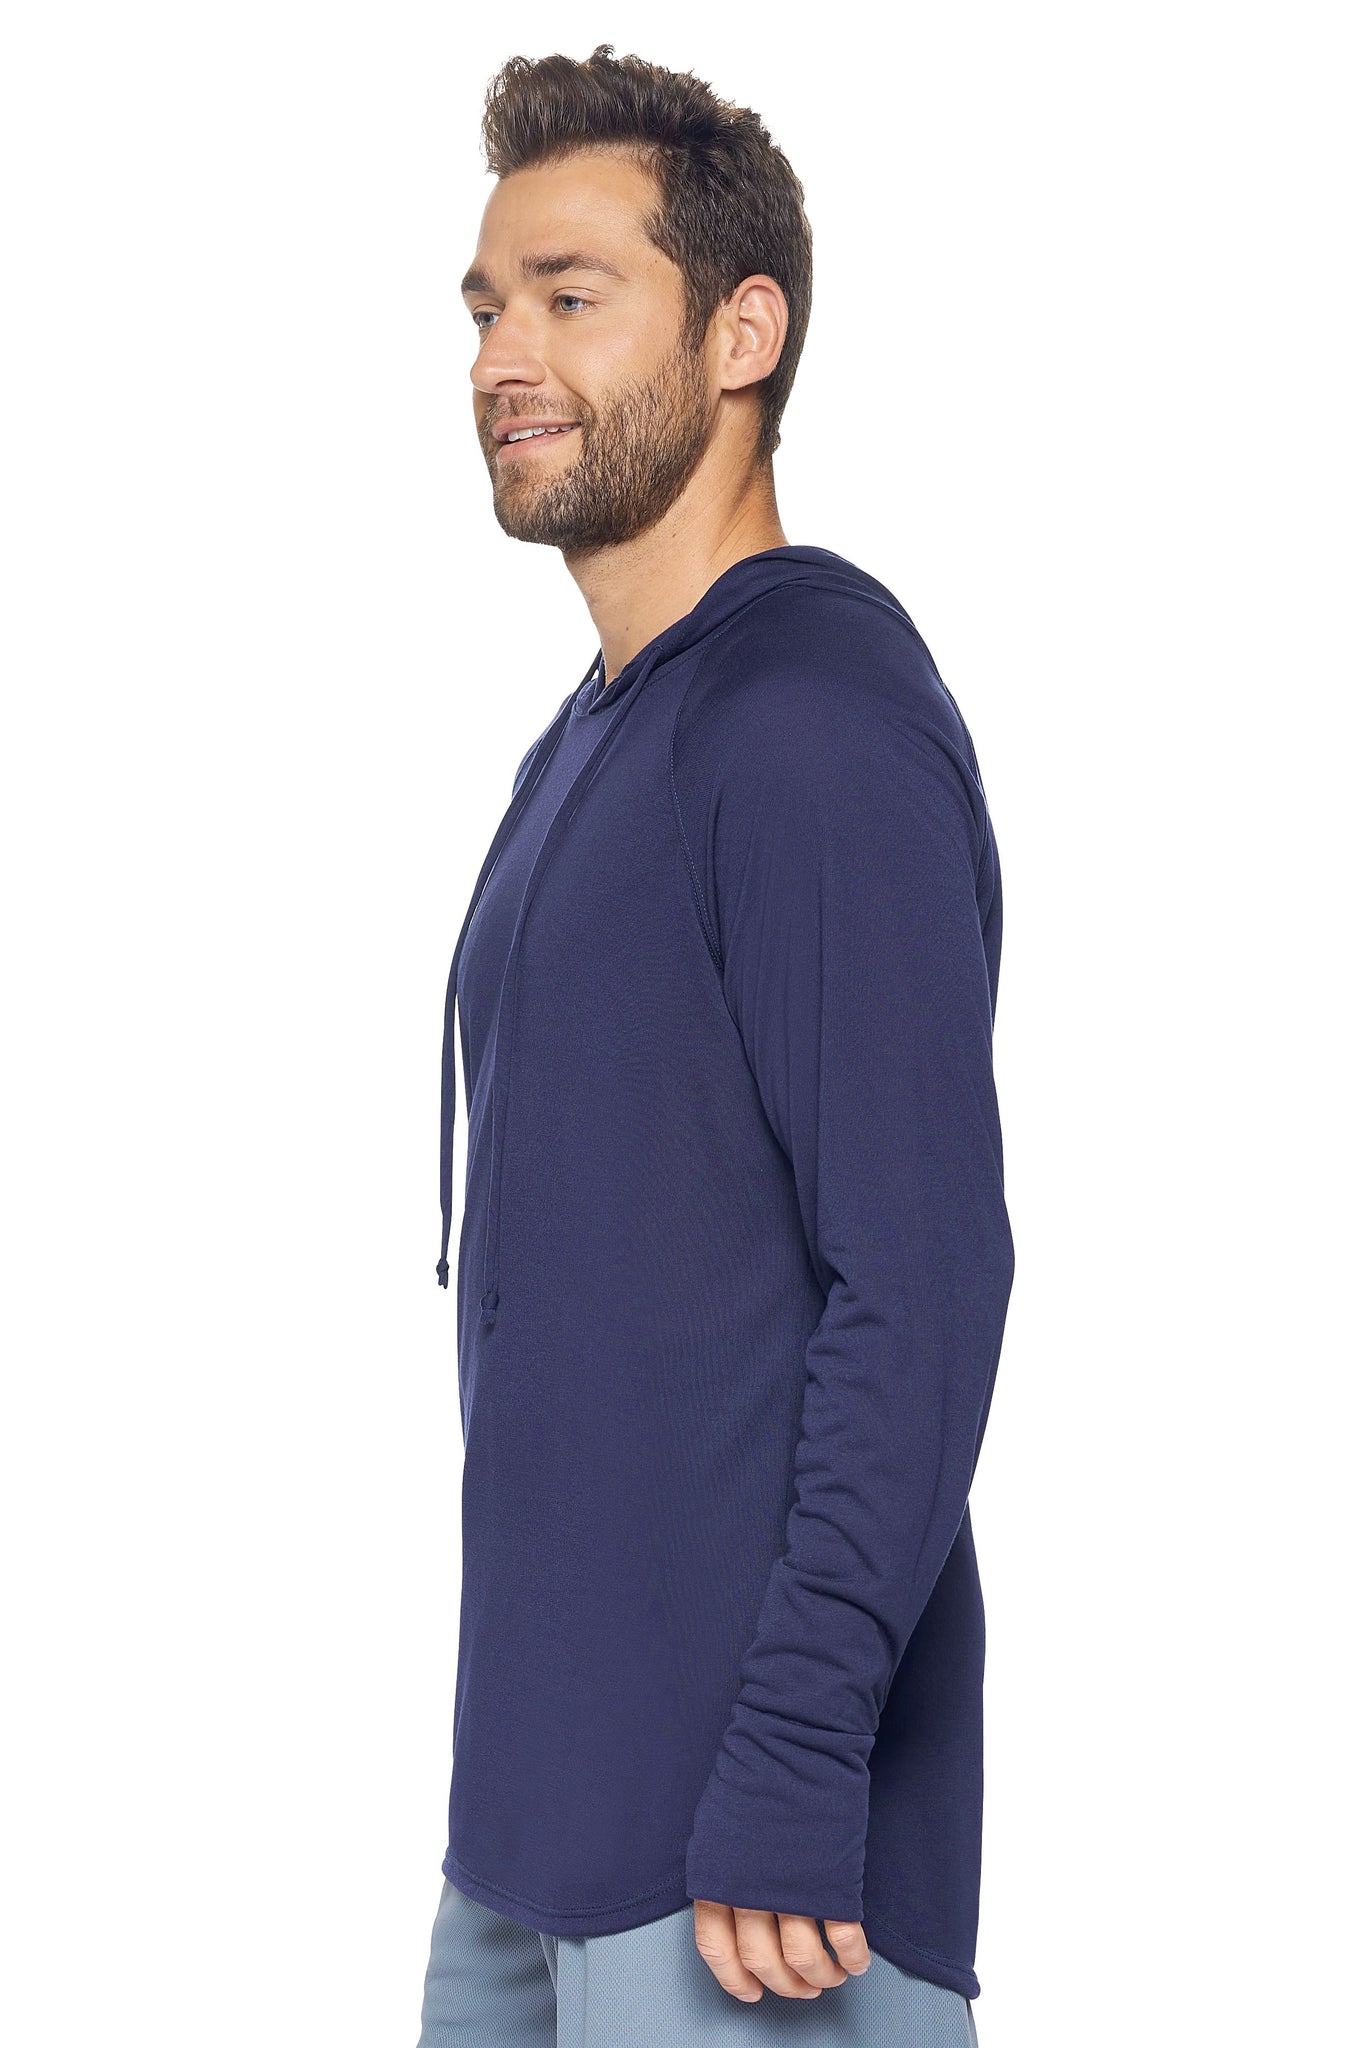 Expert Brand Wholesale Super Soft Eco-Friendly Performance Apparel Fashion Sportswear Men's Hoodie Shirt Long Sleeve Made in USA navy 2#navy